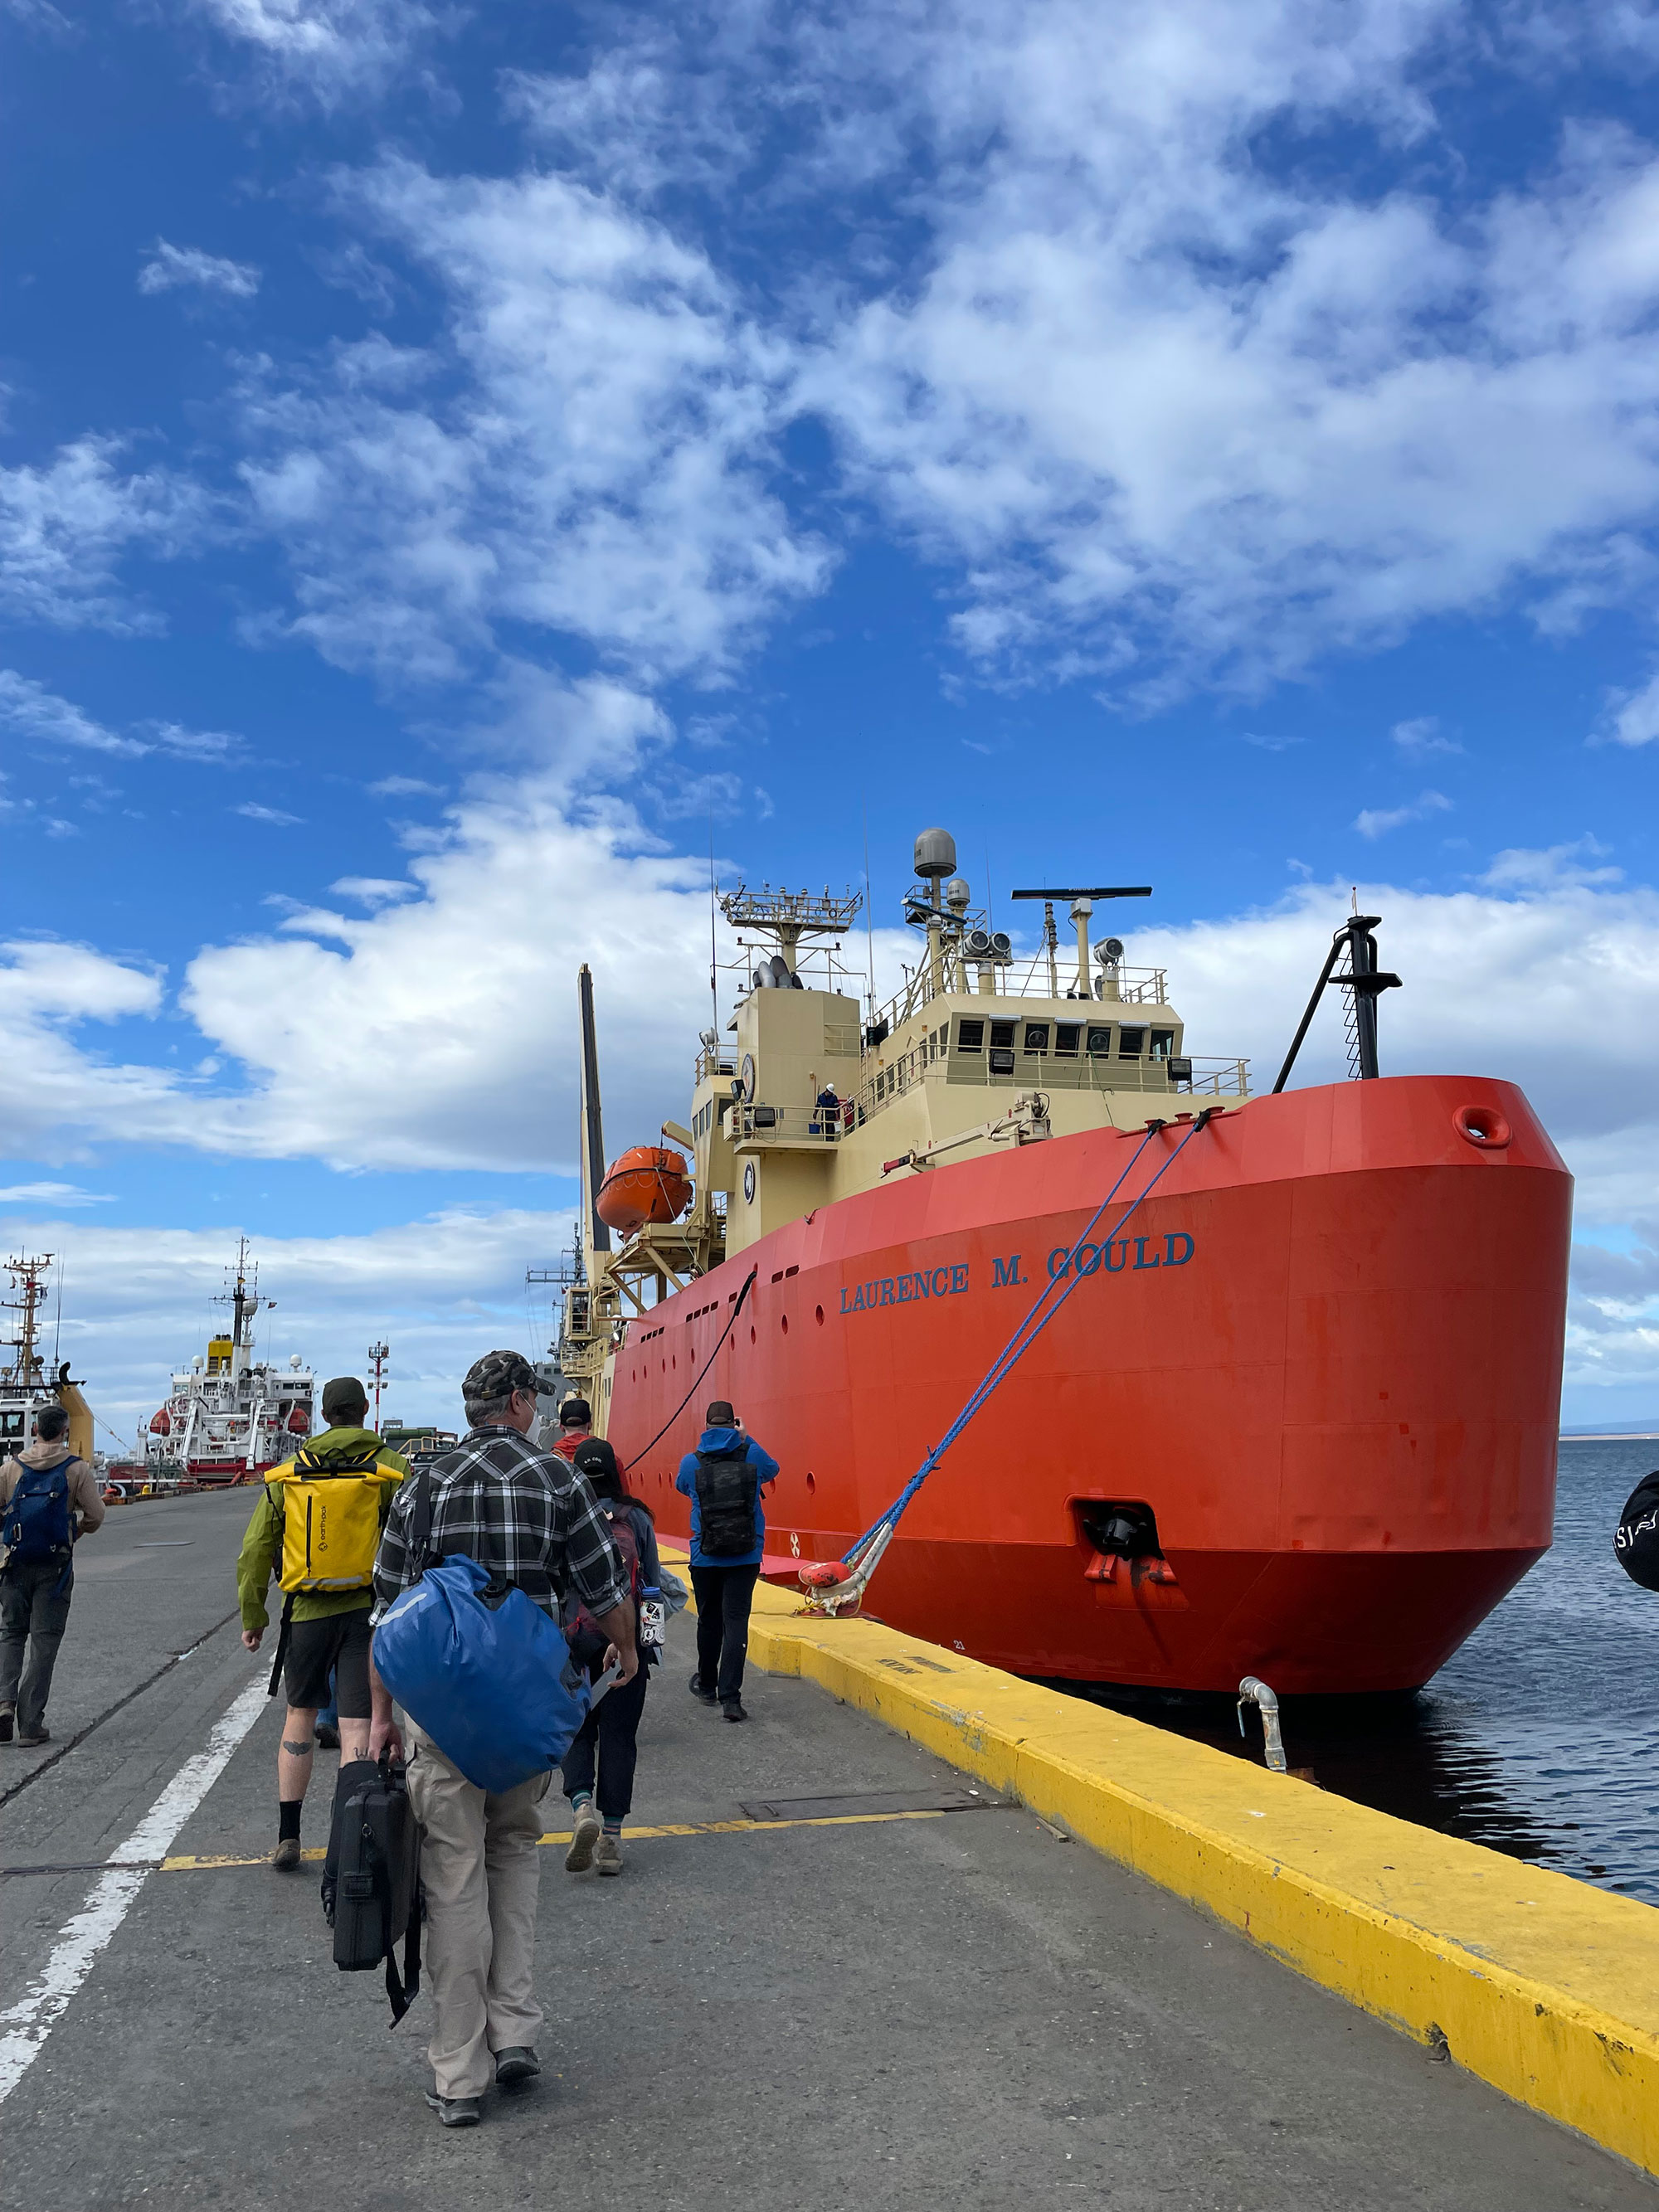 Crew walking to the Laurence M. Gould at dock - ship has a orange hull and tan structures. 